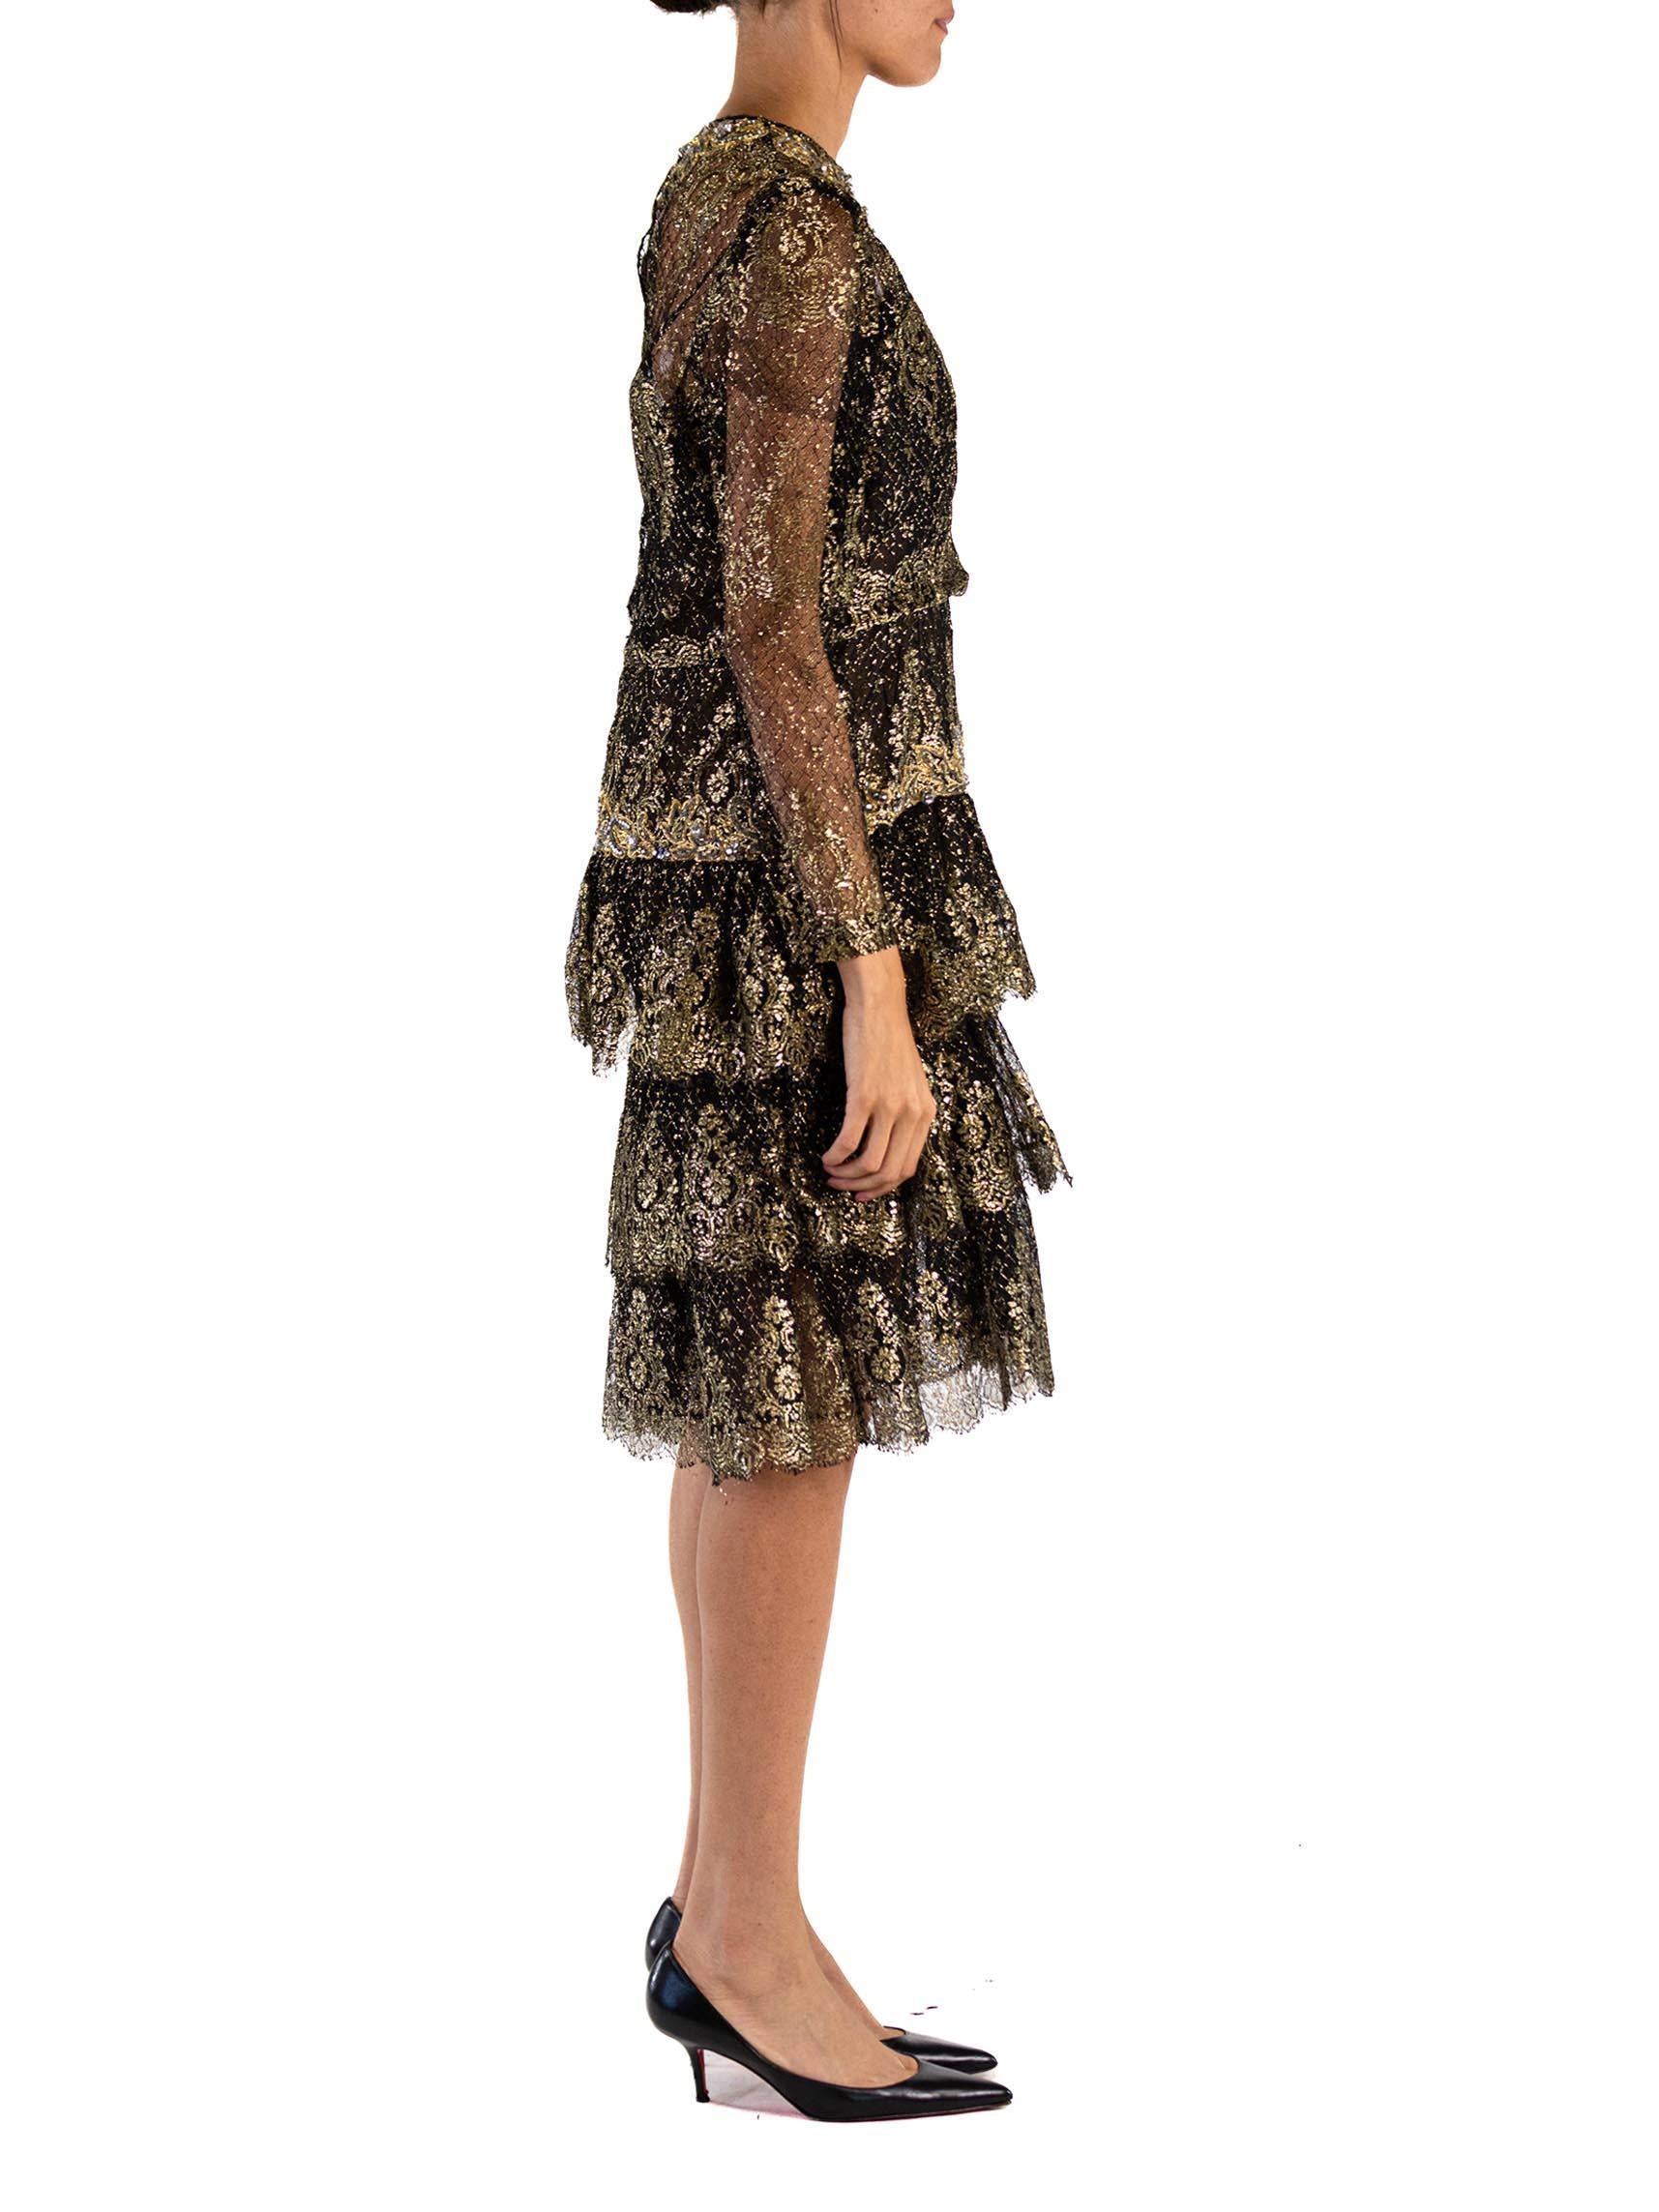 1980S OSCAR DE LA RENTA Black & Gold Metallic Lace Cocktail Dress With Crystal  In Excellent Condition For Sale In New York, NY